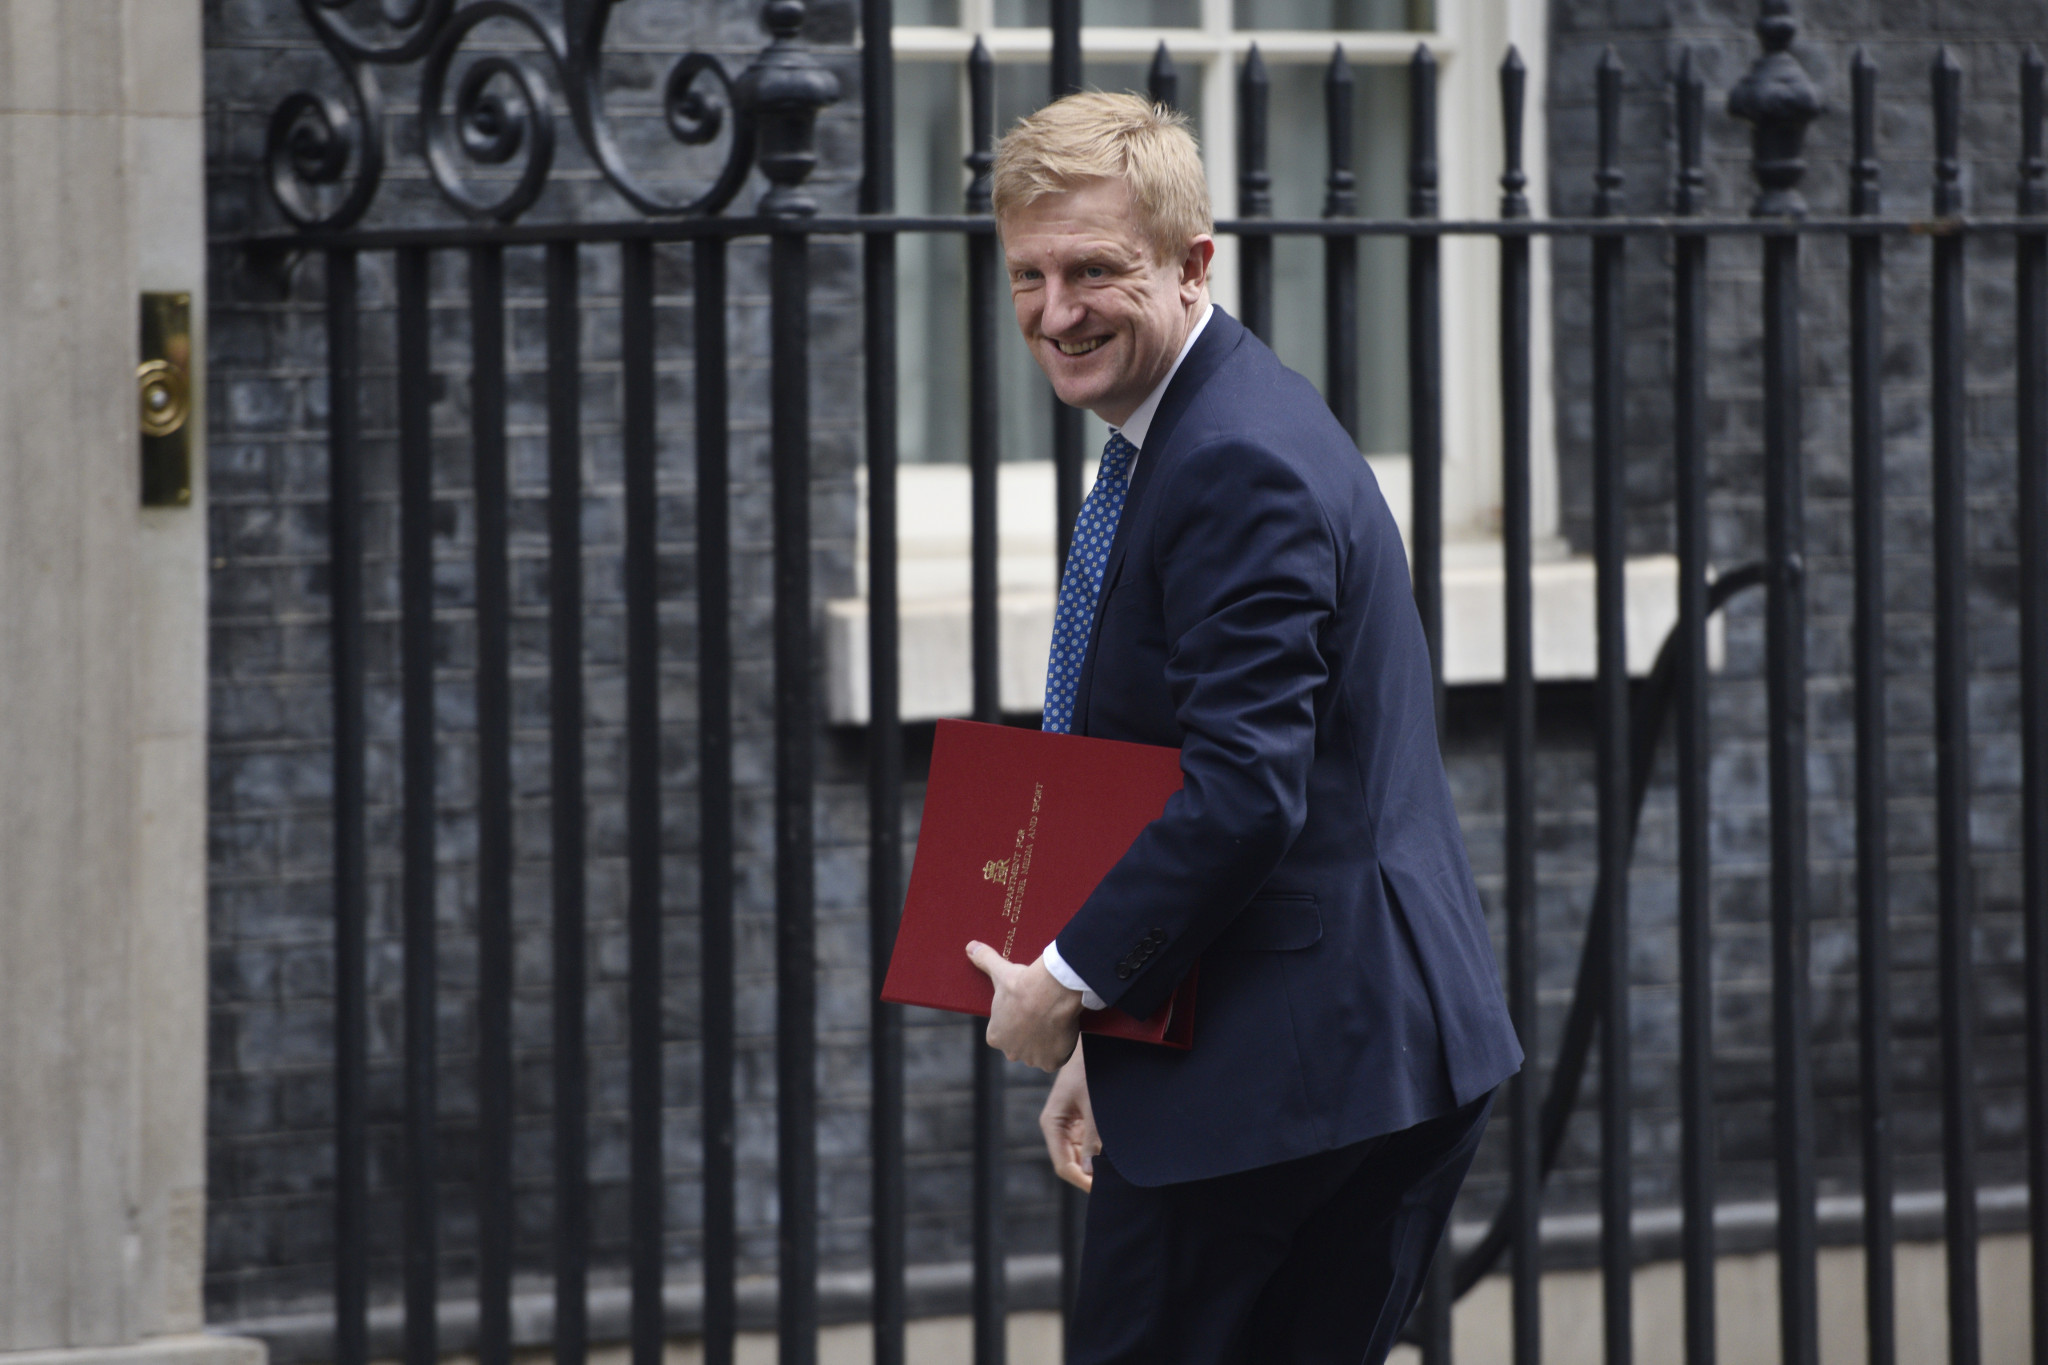 Culture Secretary Oliver Dowden is understood to have held meetings with key football figures over tackling racism and homophobia in the sport ©Getty Images